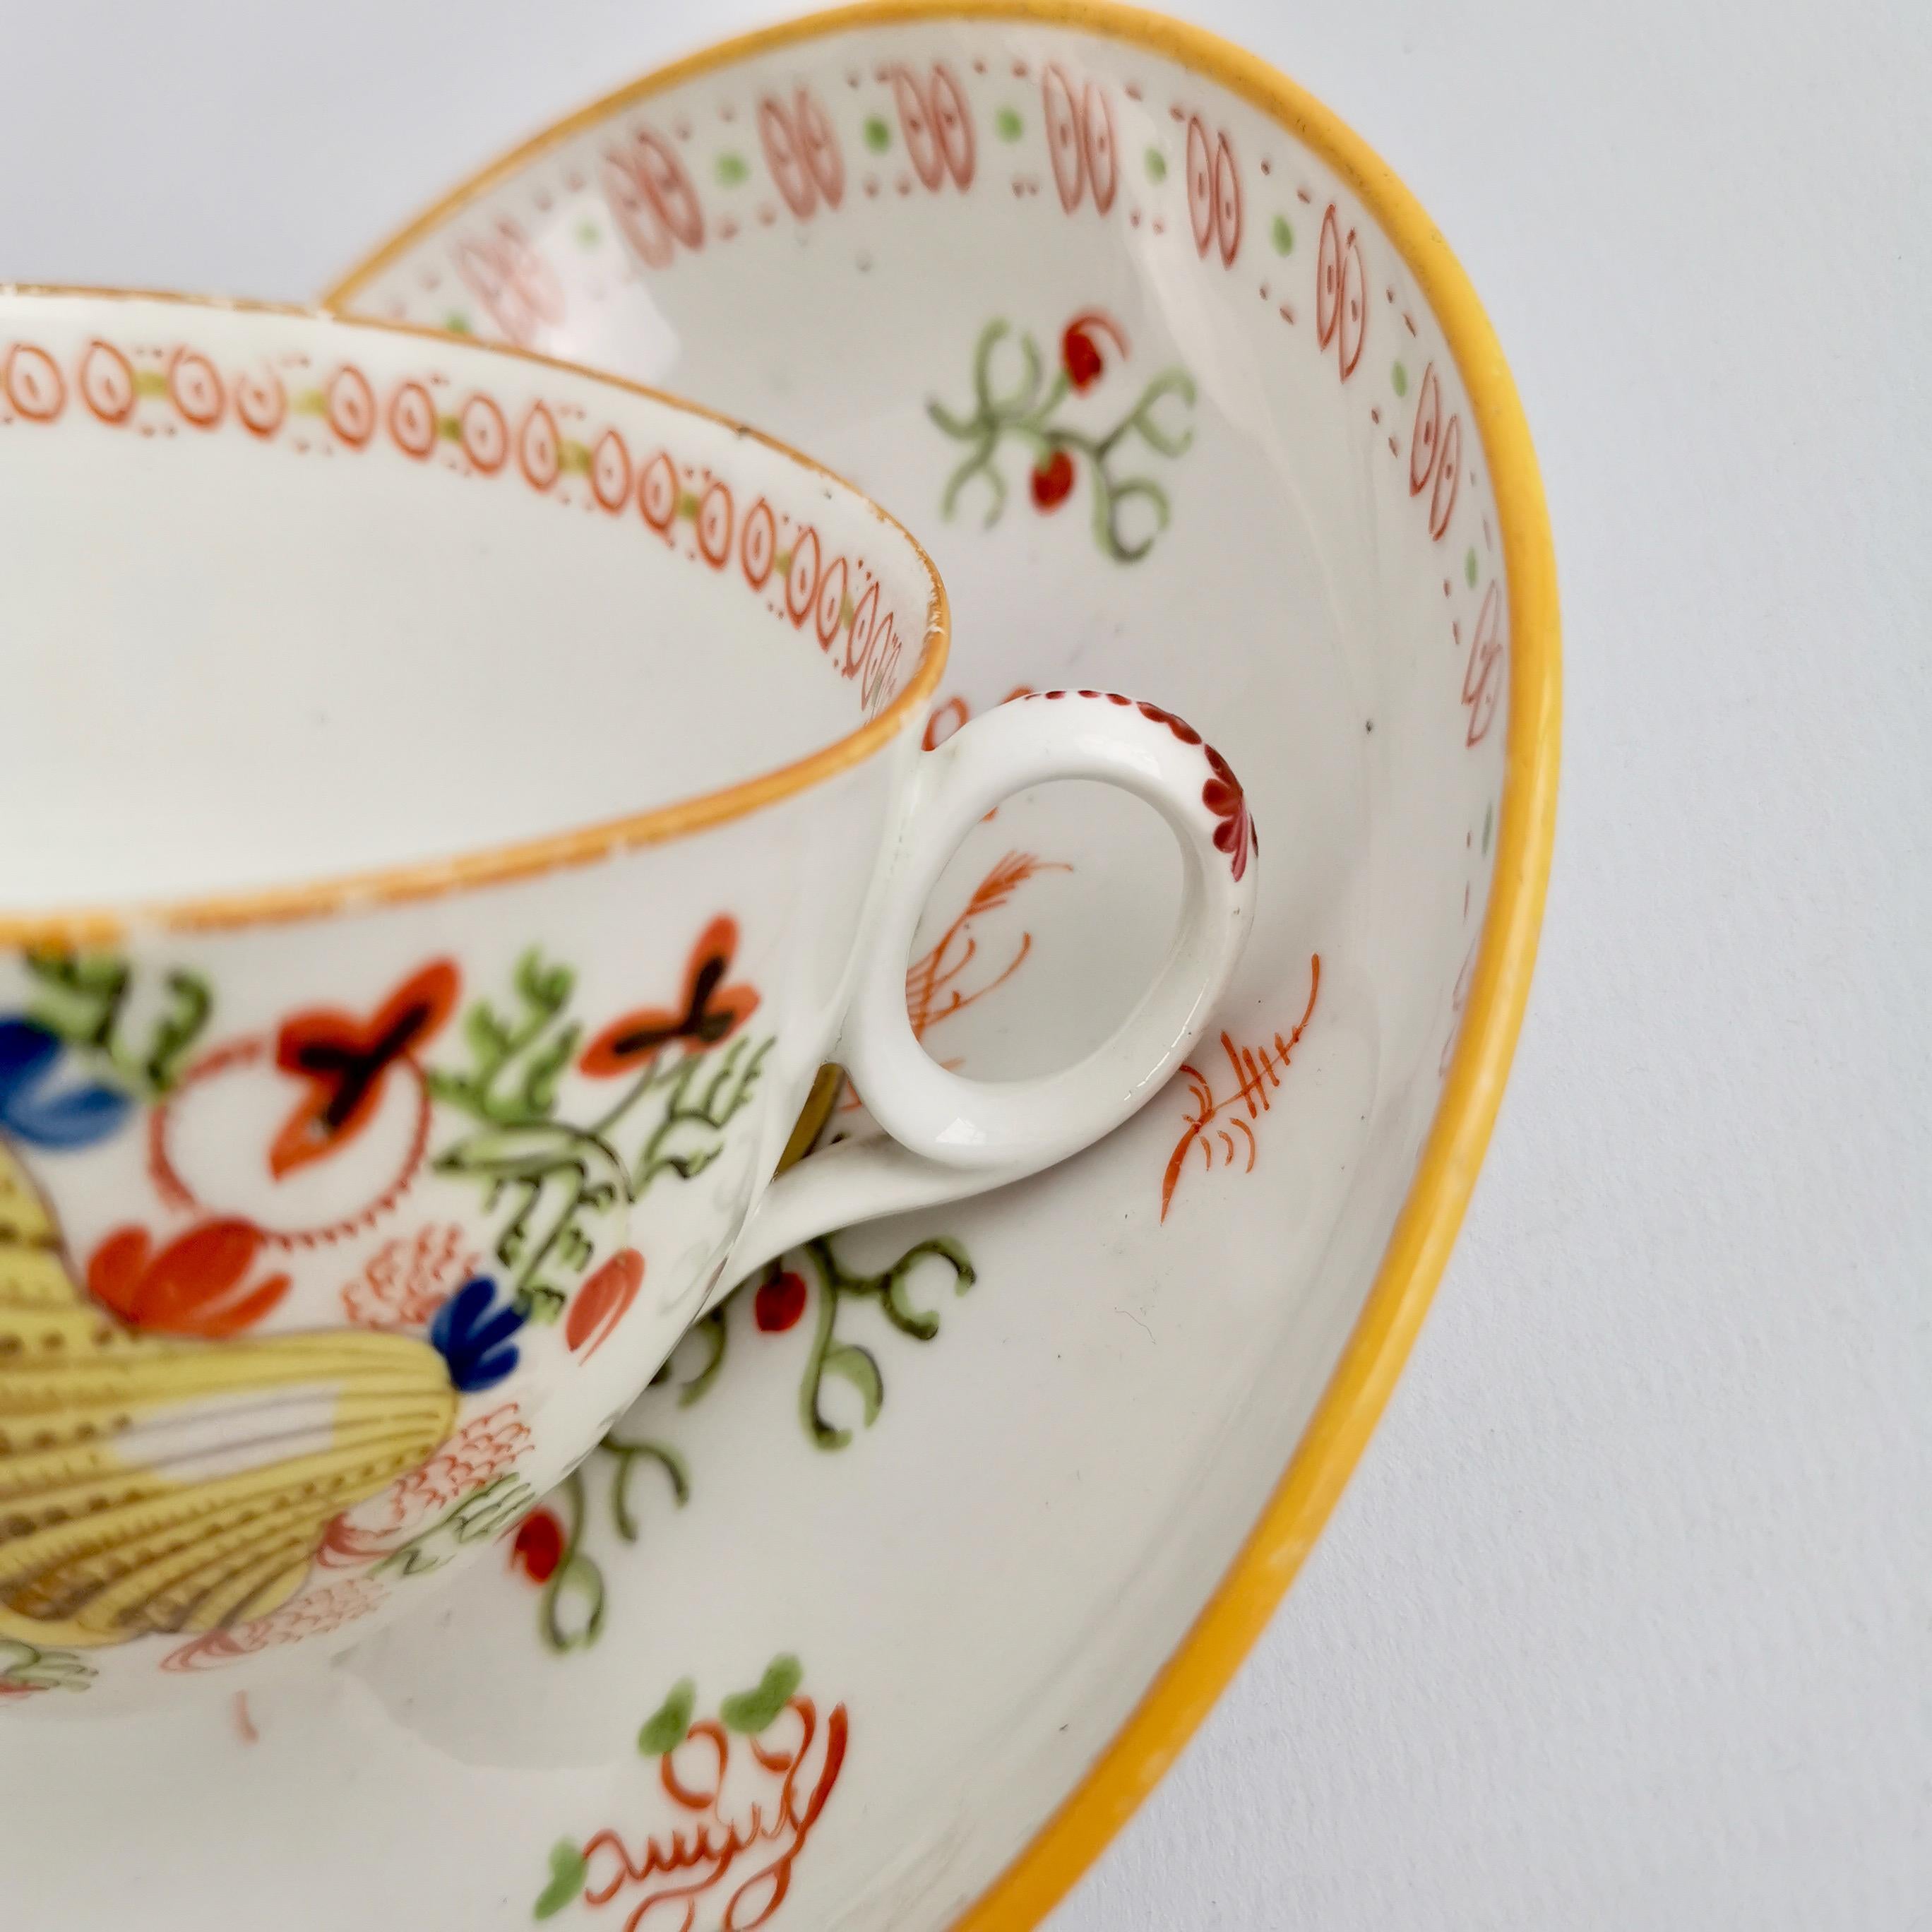 Regency New Hall Porcelain Teacup, Yellow Shell Pattern 1045, ca 1810